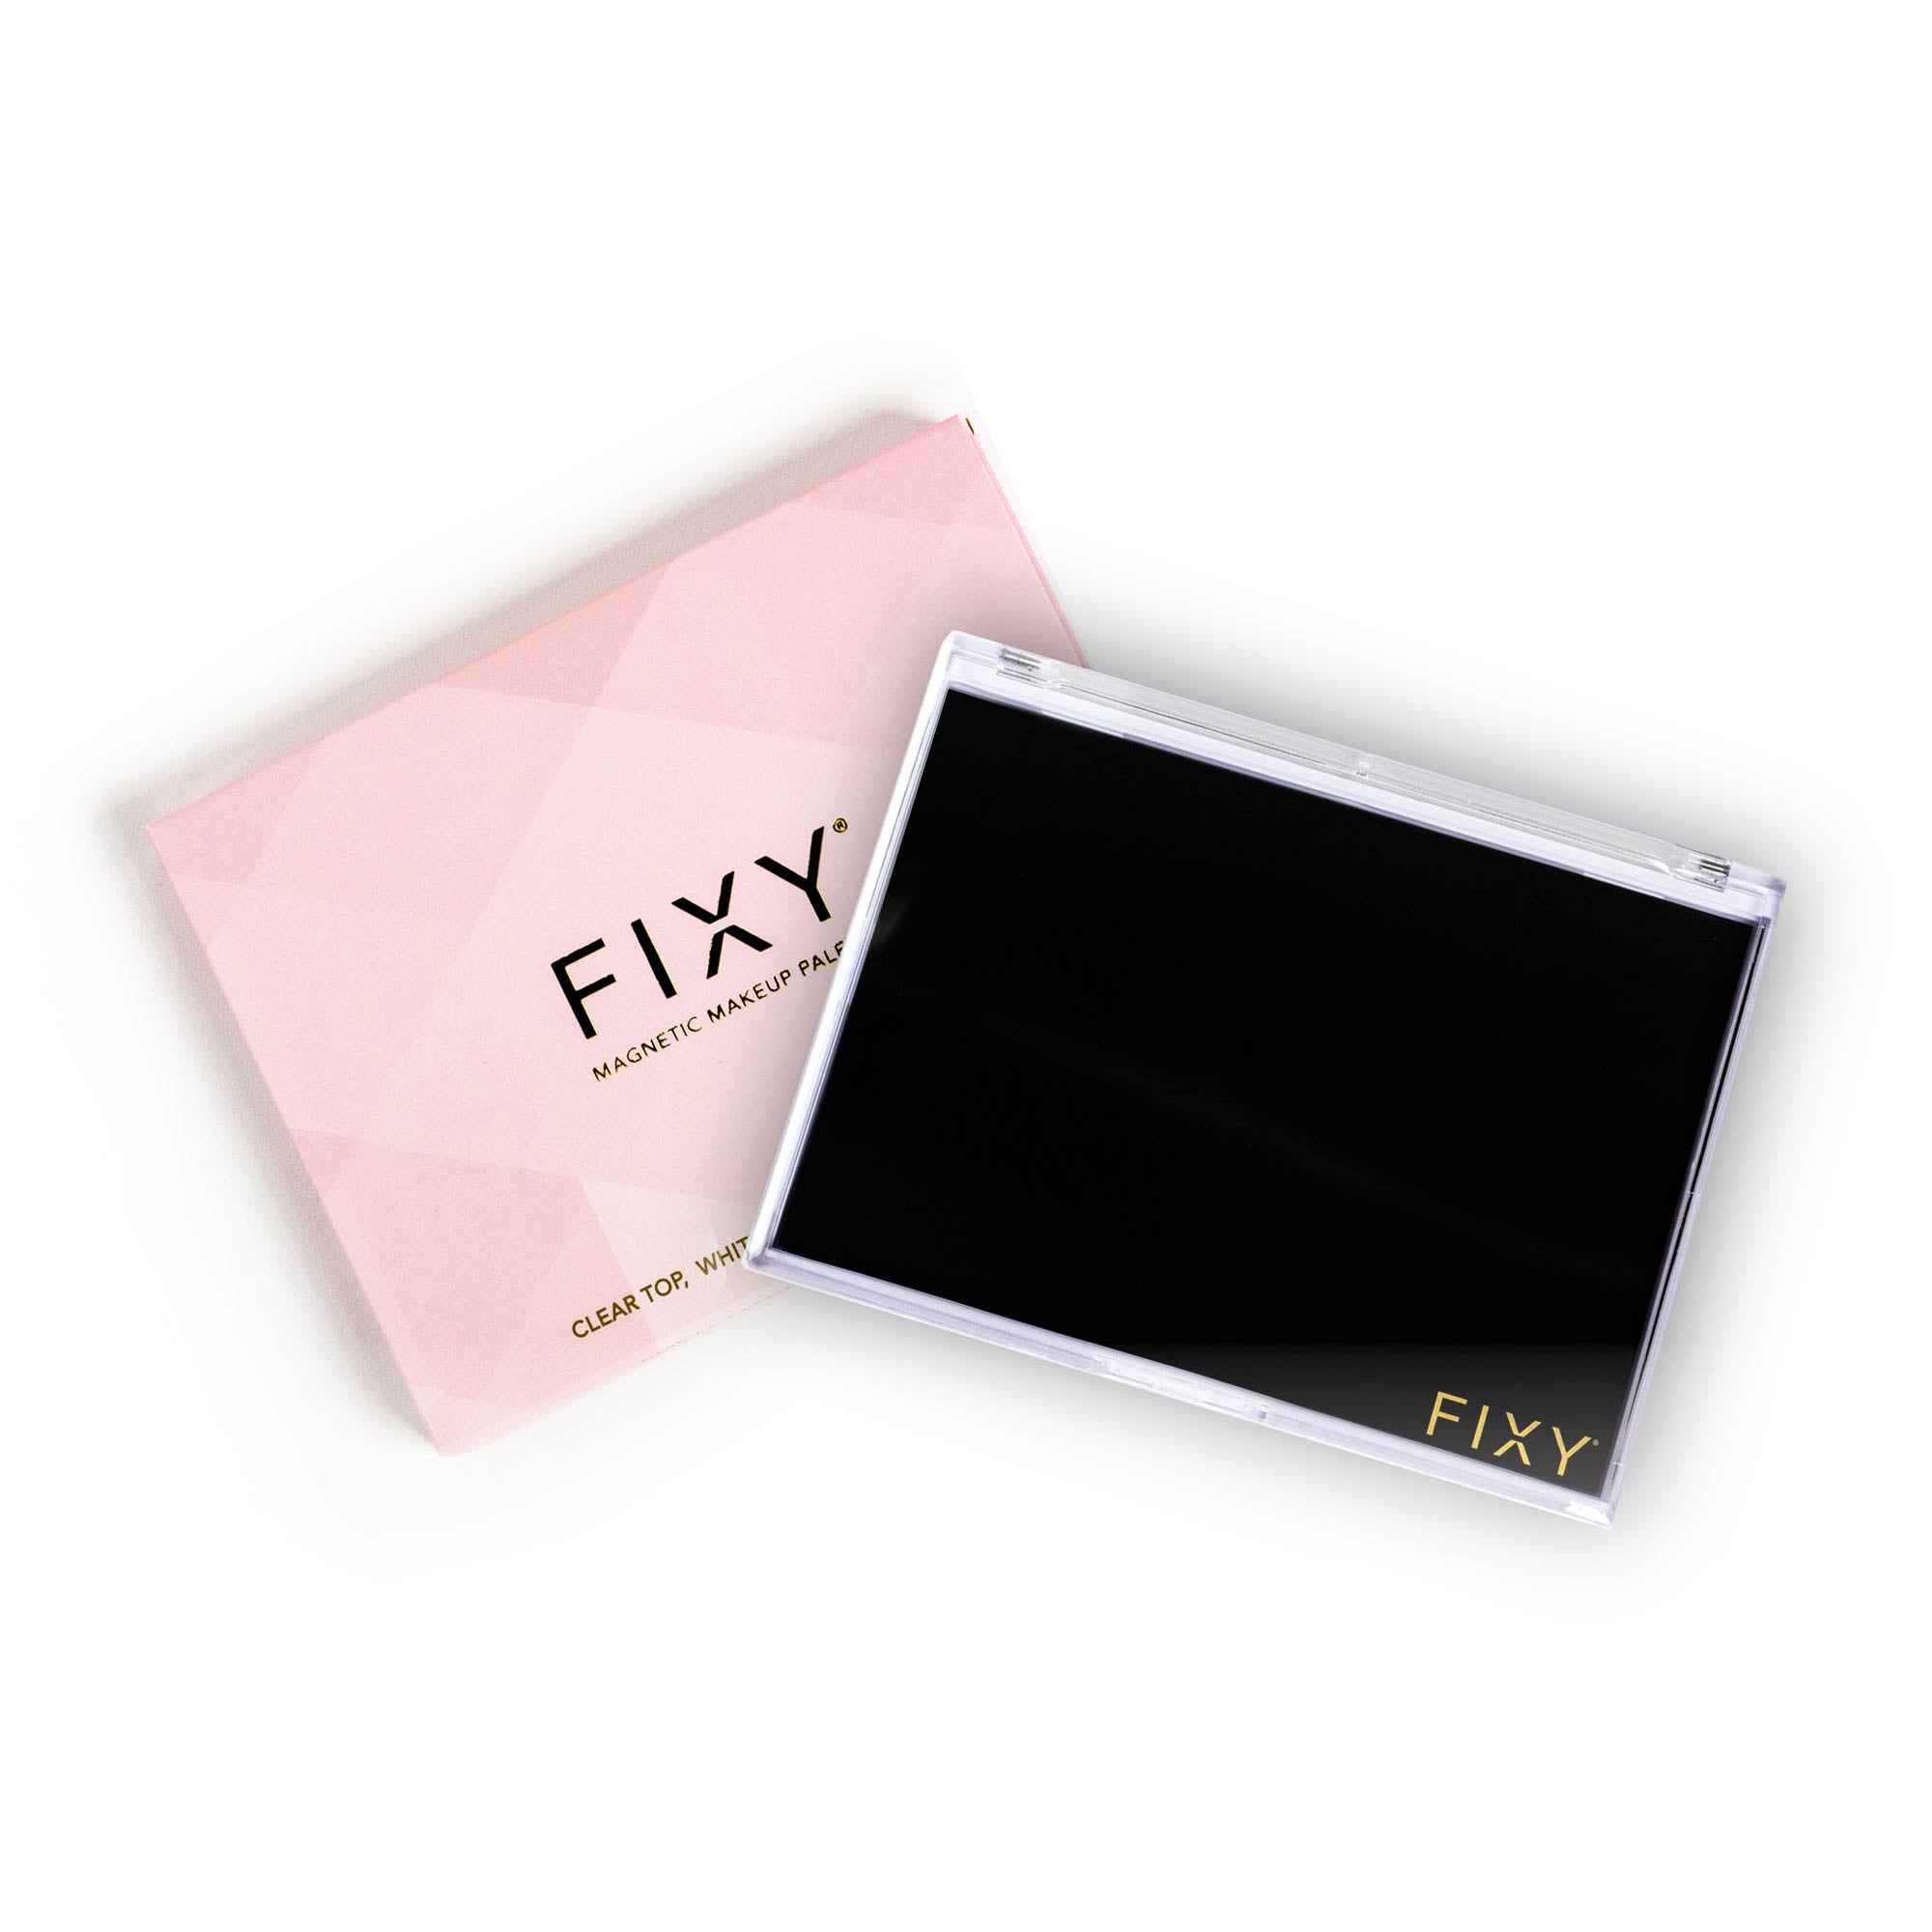 FIXY Medium 4.3x 5.7 Magnetic Makeup Palette, crafted from post-consumer recycled plastic, presented next to its geometric patterned box featuring a clear top, white base, and an extra-strong magnet, demonstrating the brand&#39;s eco-friendly packaging and product design.